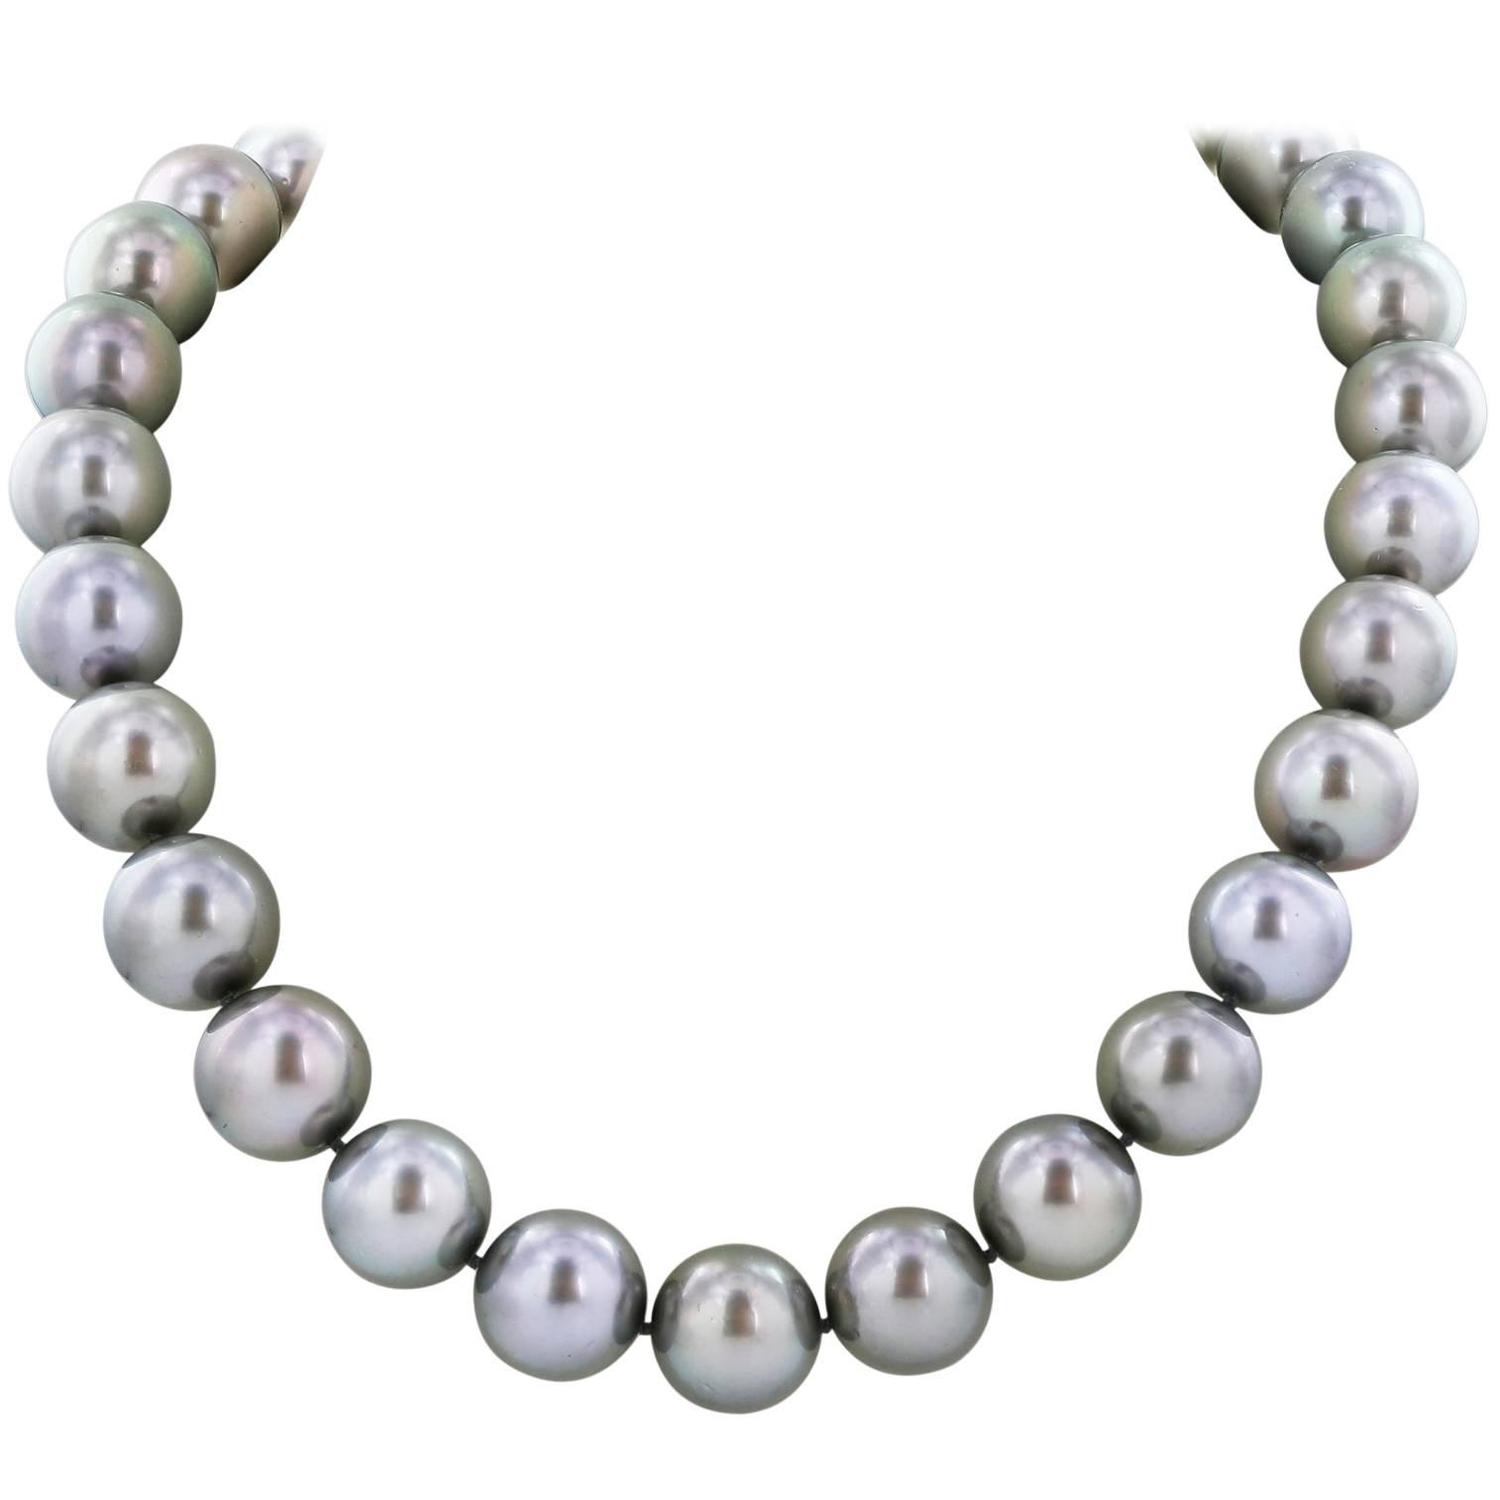 13-17 mm 36 Inch Tahitian Grey Pearl Necklace For Sale at 1stdibs